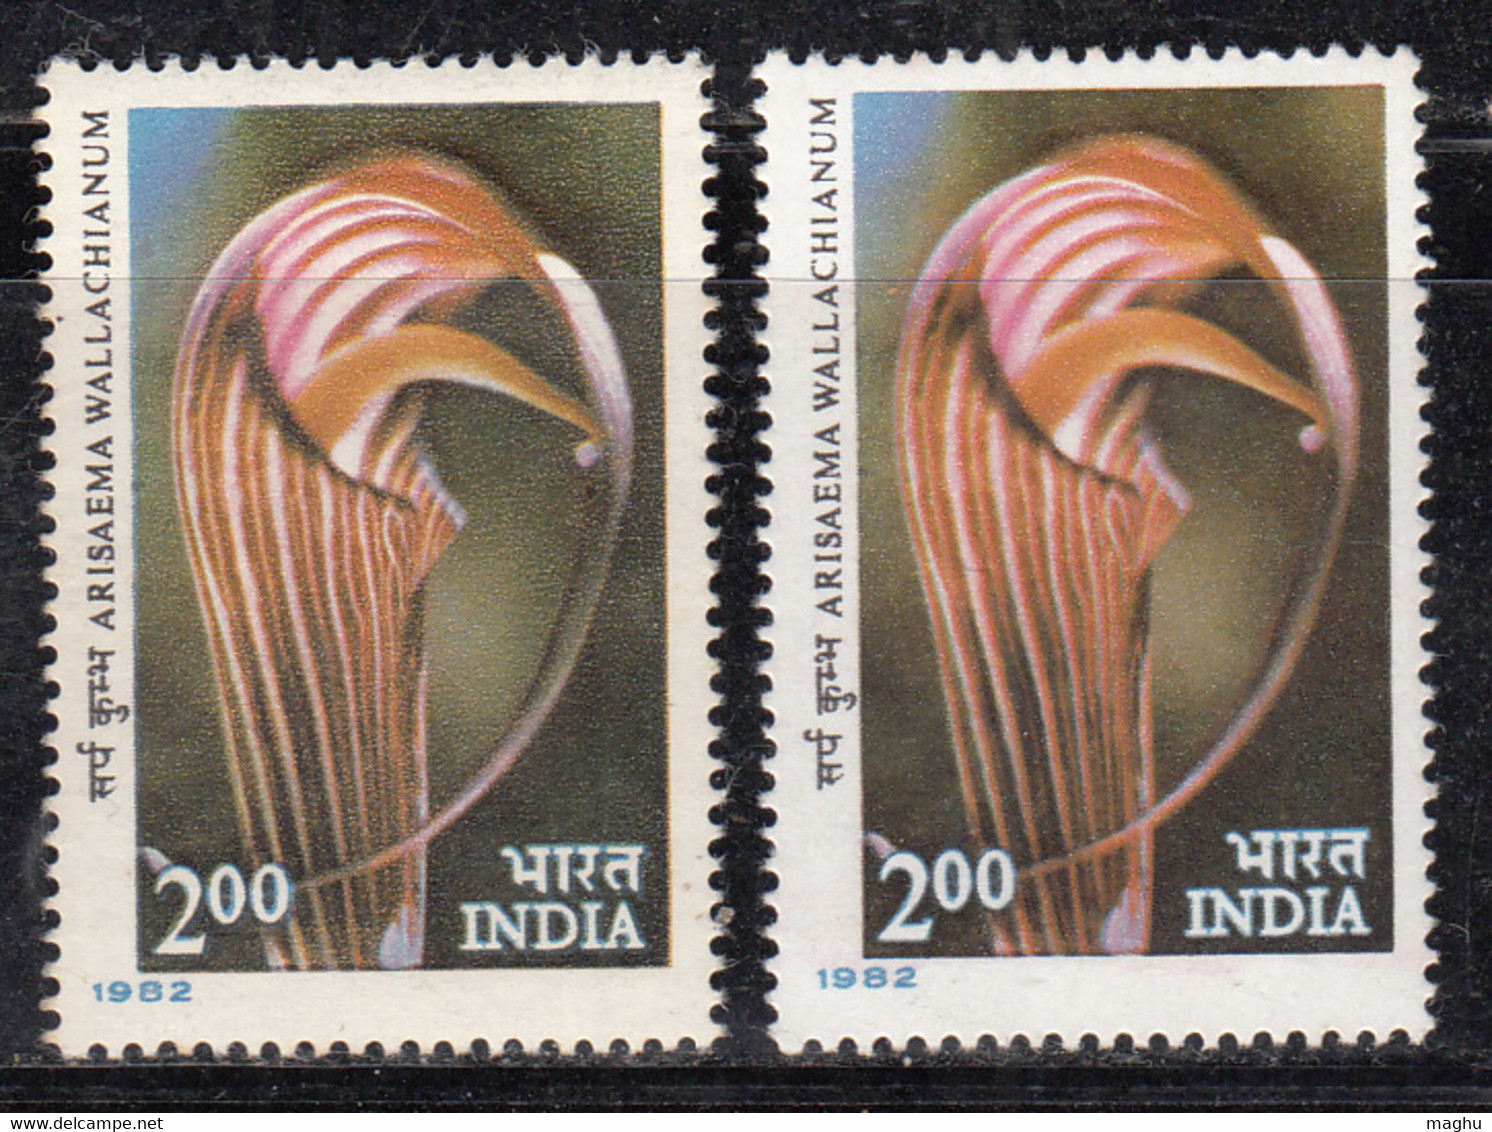 EFO, Colour Variety, 2.00 Himalayan Flowers Series, Flower, Plant, India MNH 1982 - Errors, Freaks & Oddities (EFO)